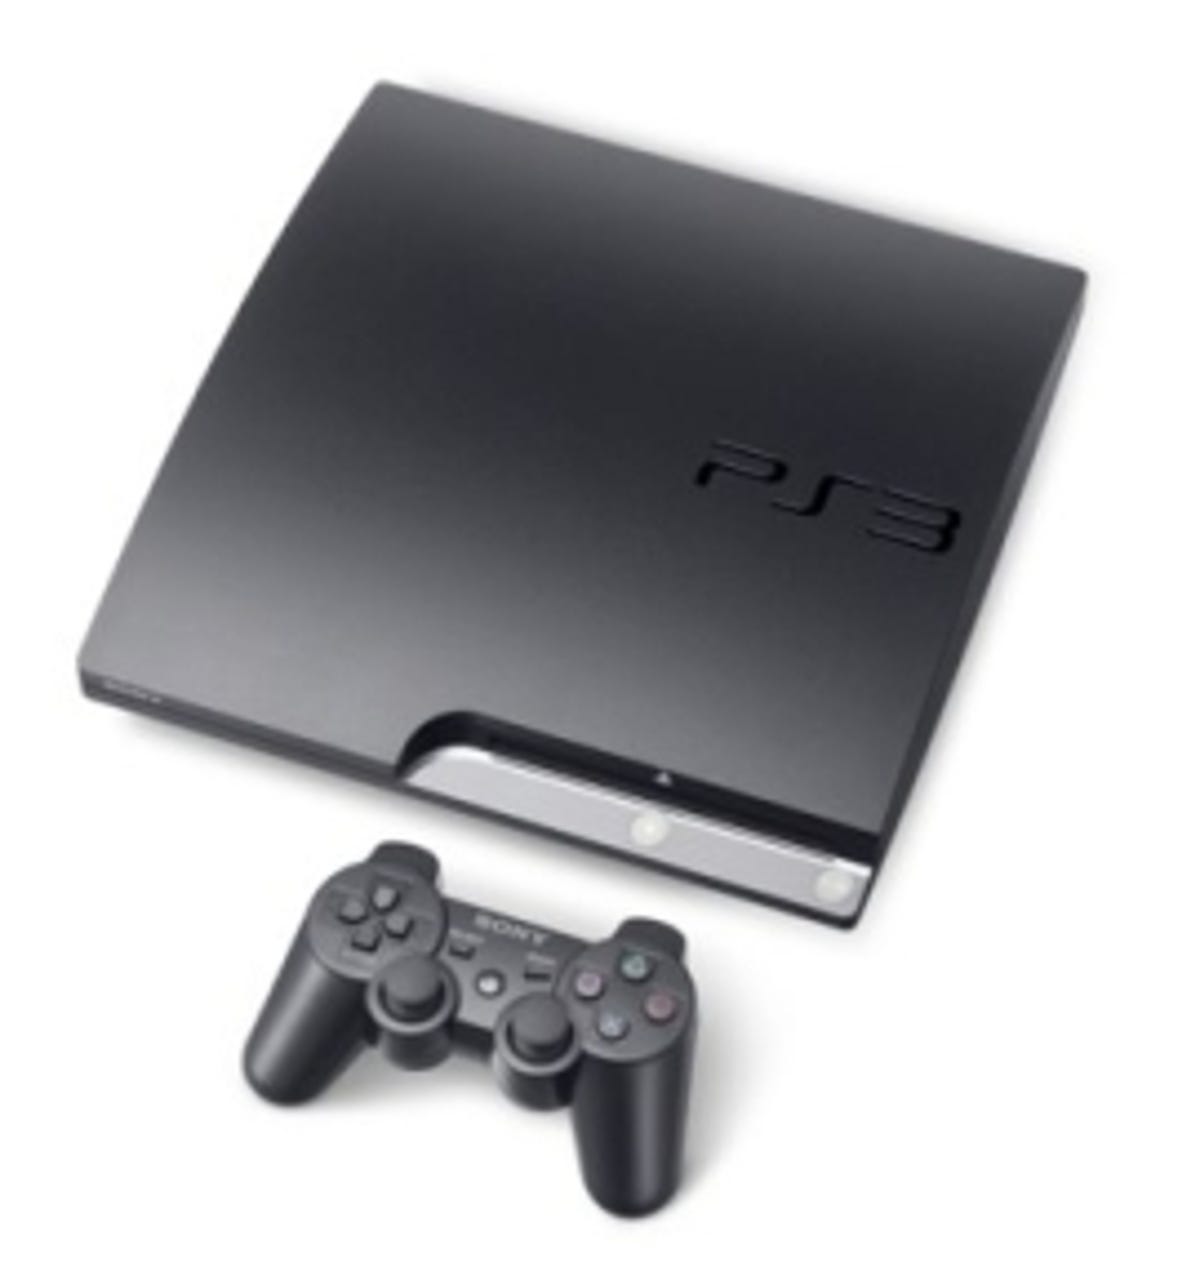 The PlayStation 3 might be available for a long time.